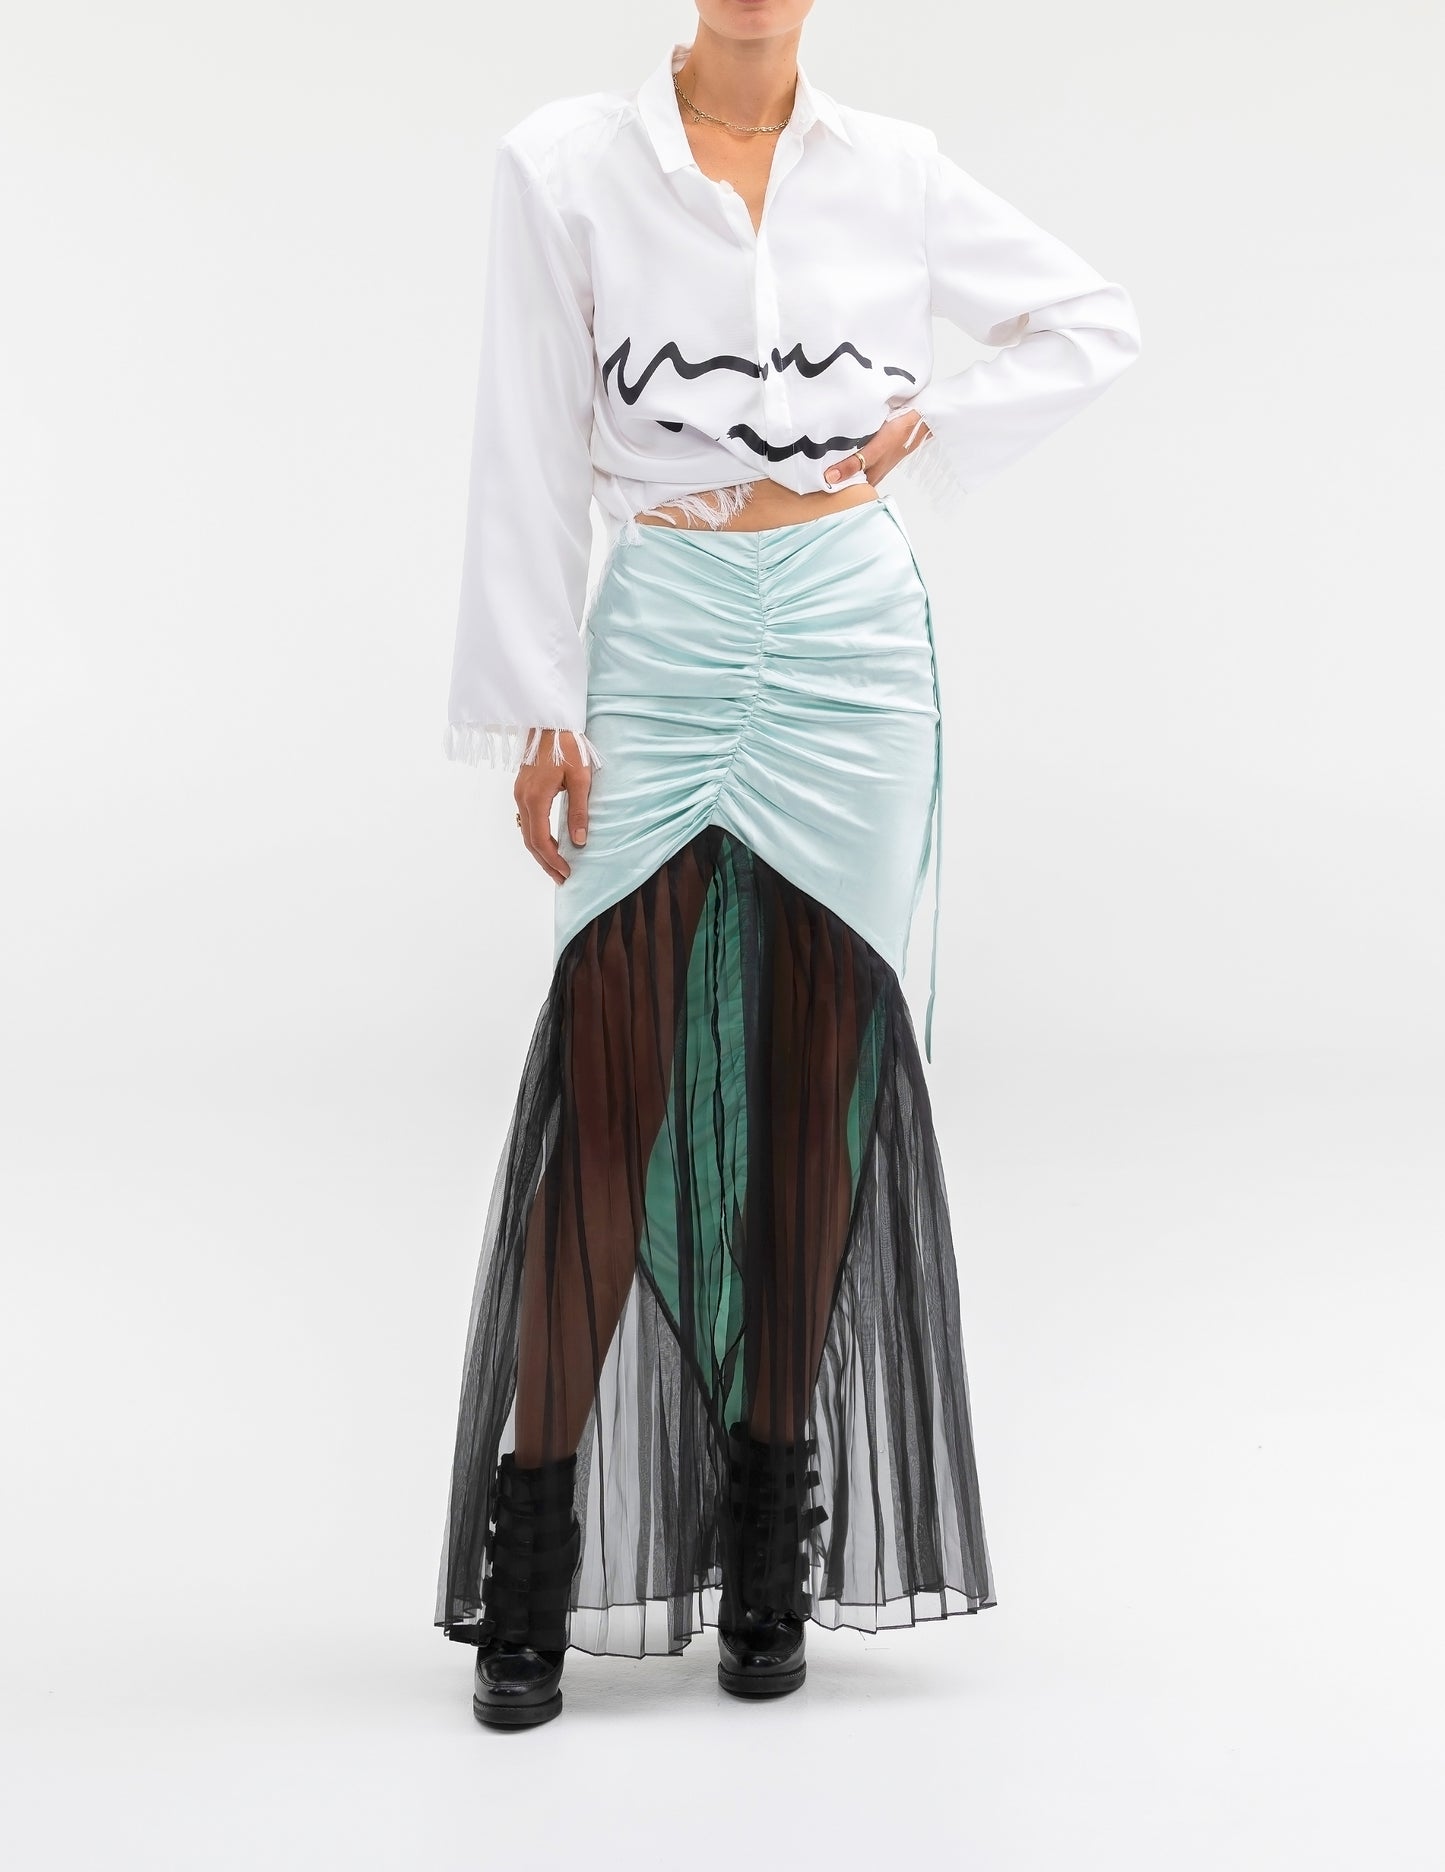 MIXED MEDIA ROUCHED FLOOR LENGHT SKIRT